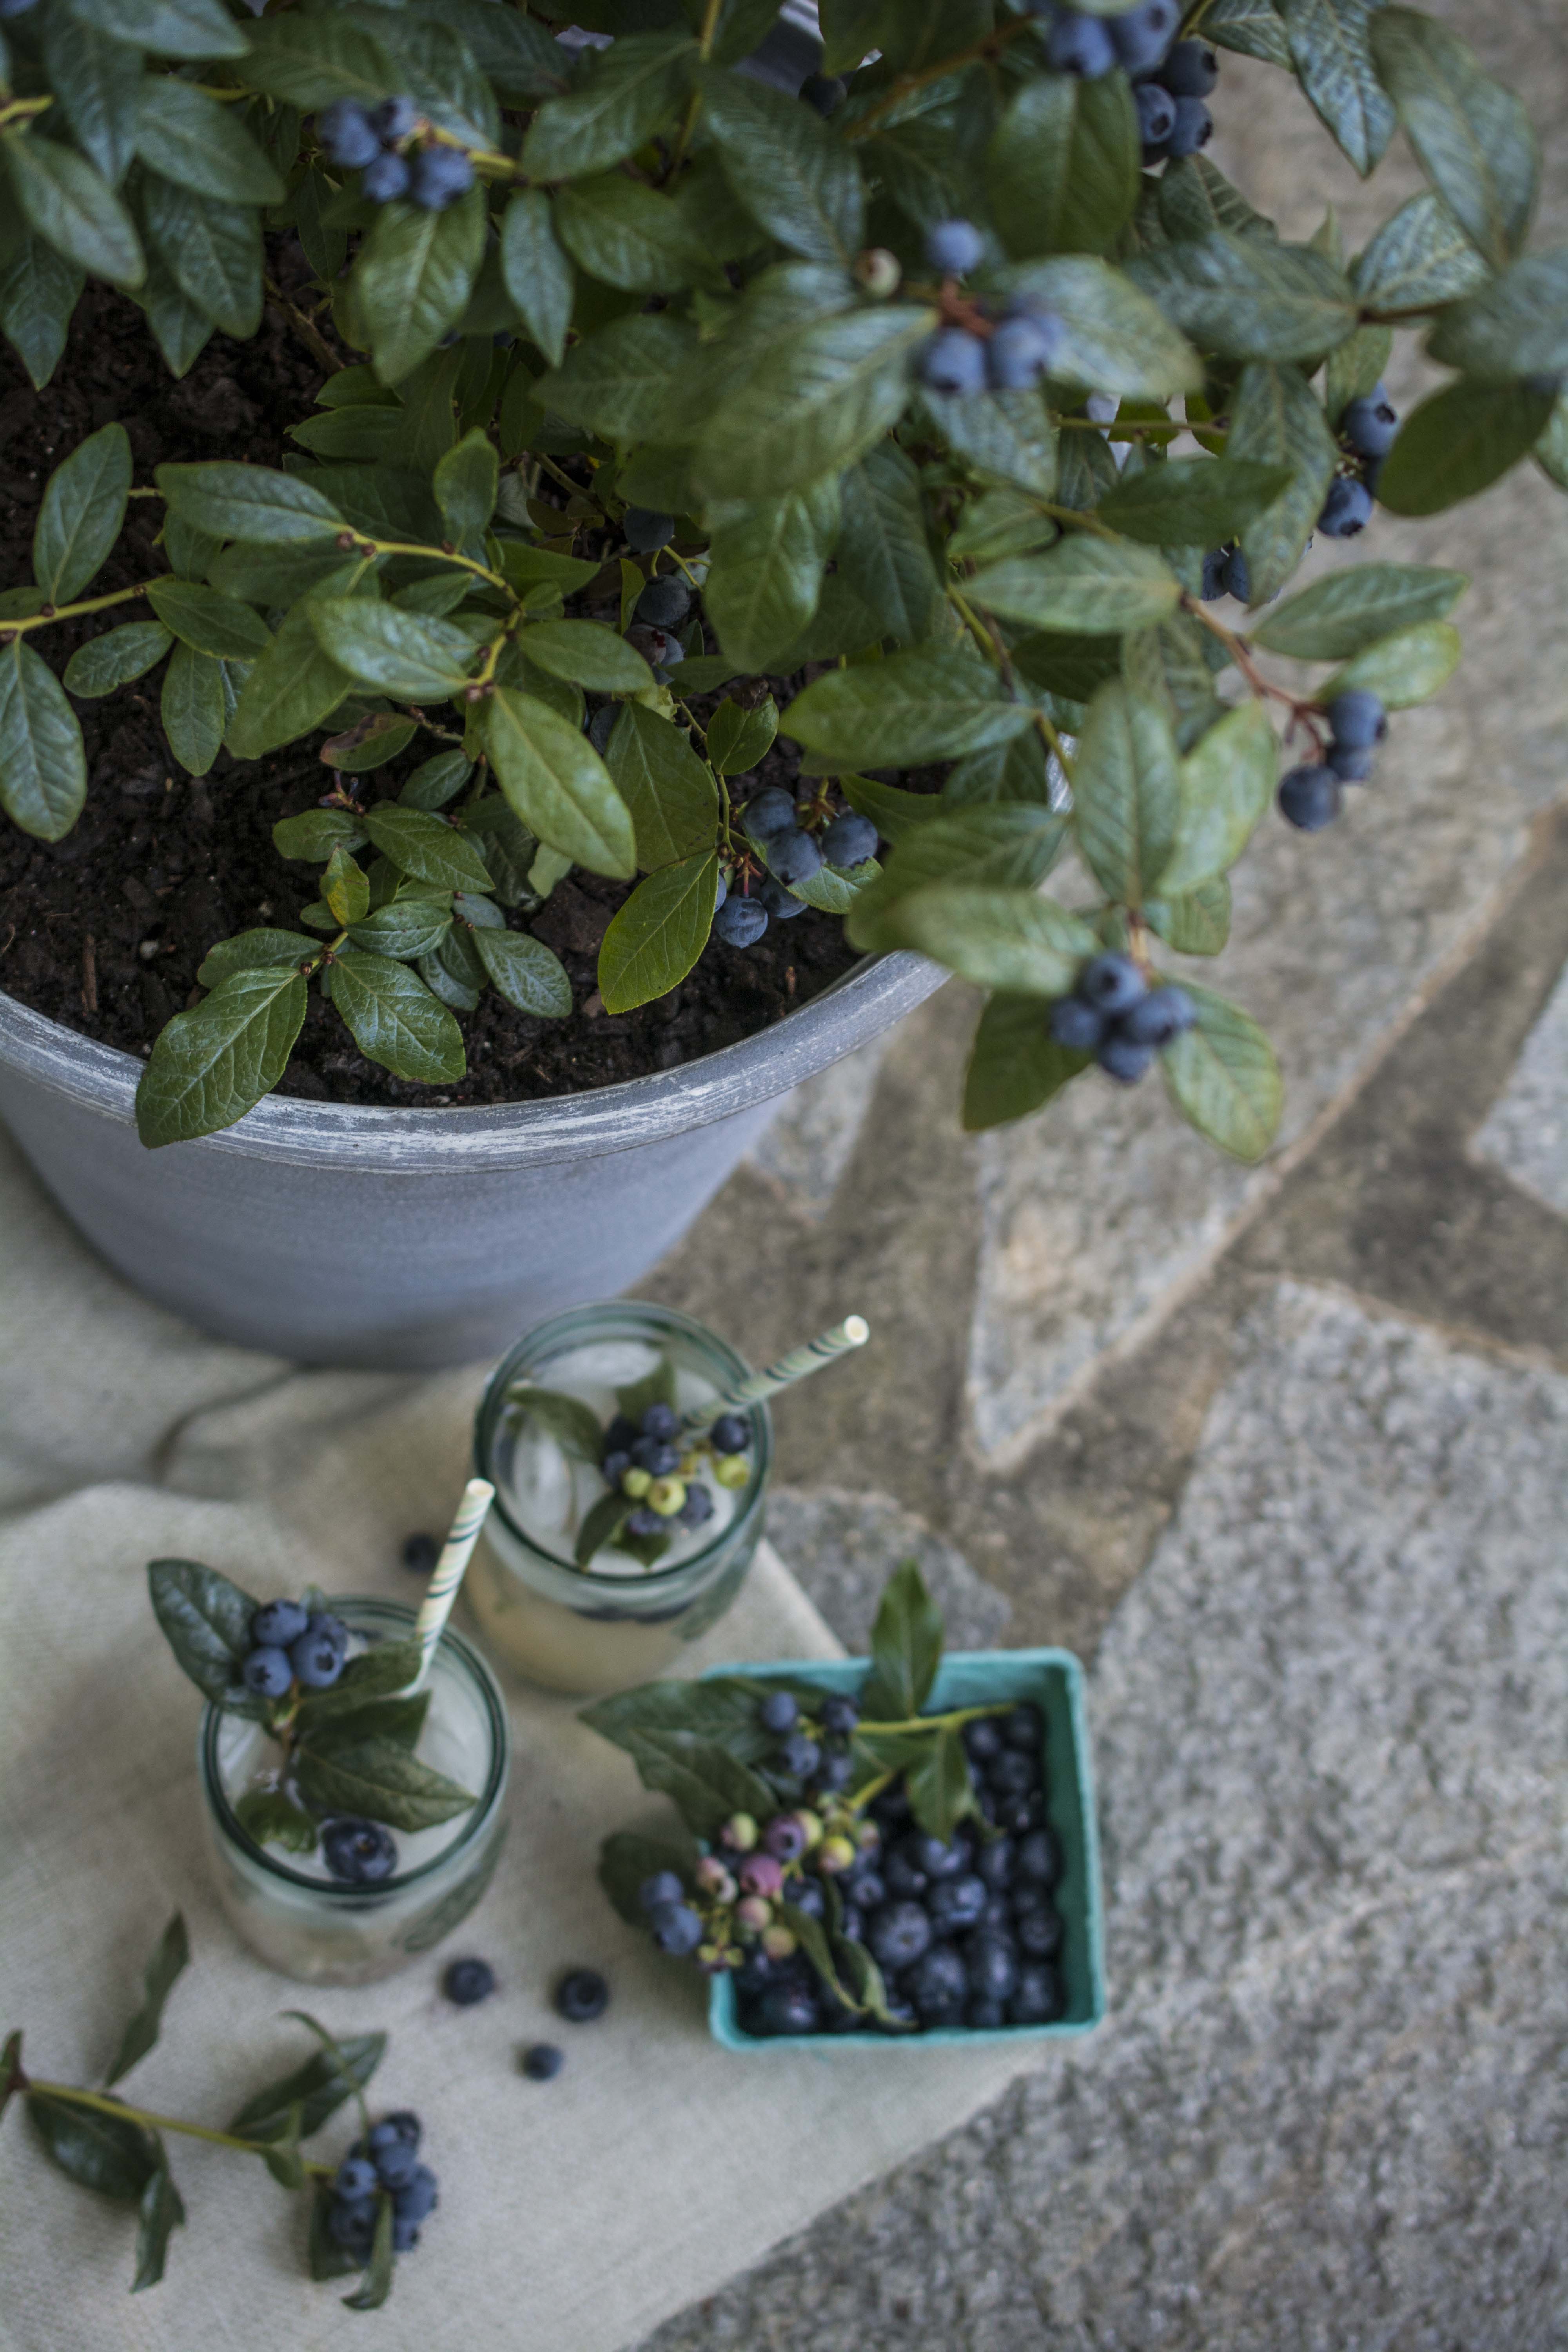 Give the gift of health and wellness this season with blueberries, raspberries and blackberries from the Bushel and Berry™ Collection of ornamental edible shrubs.